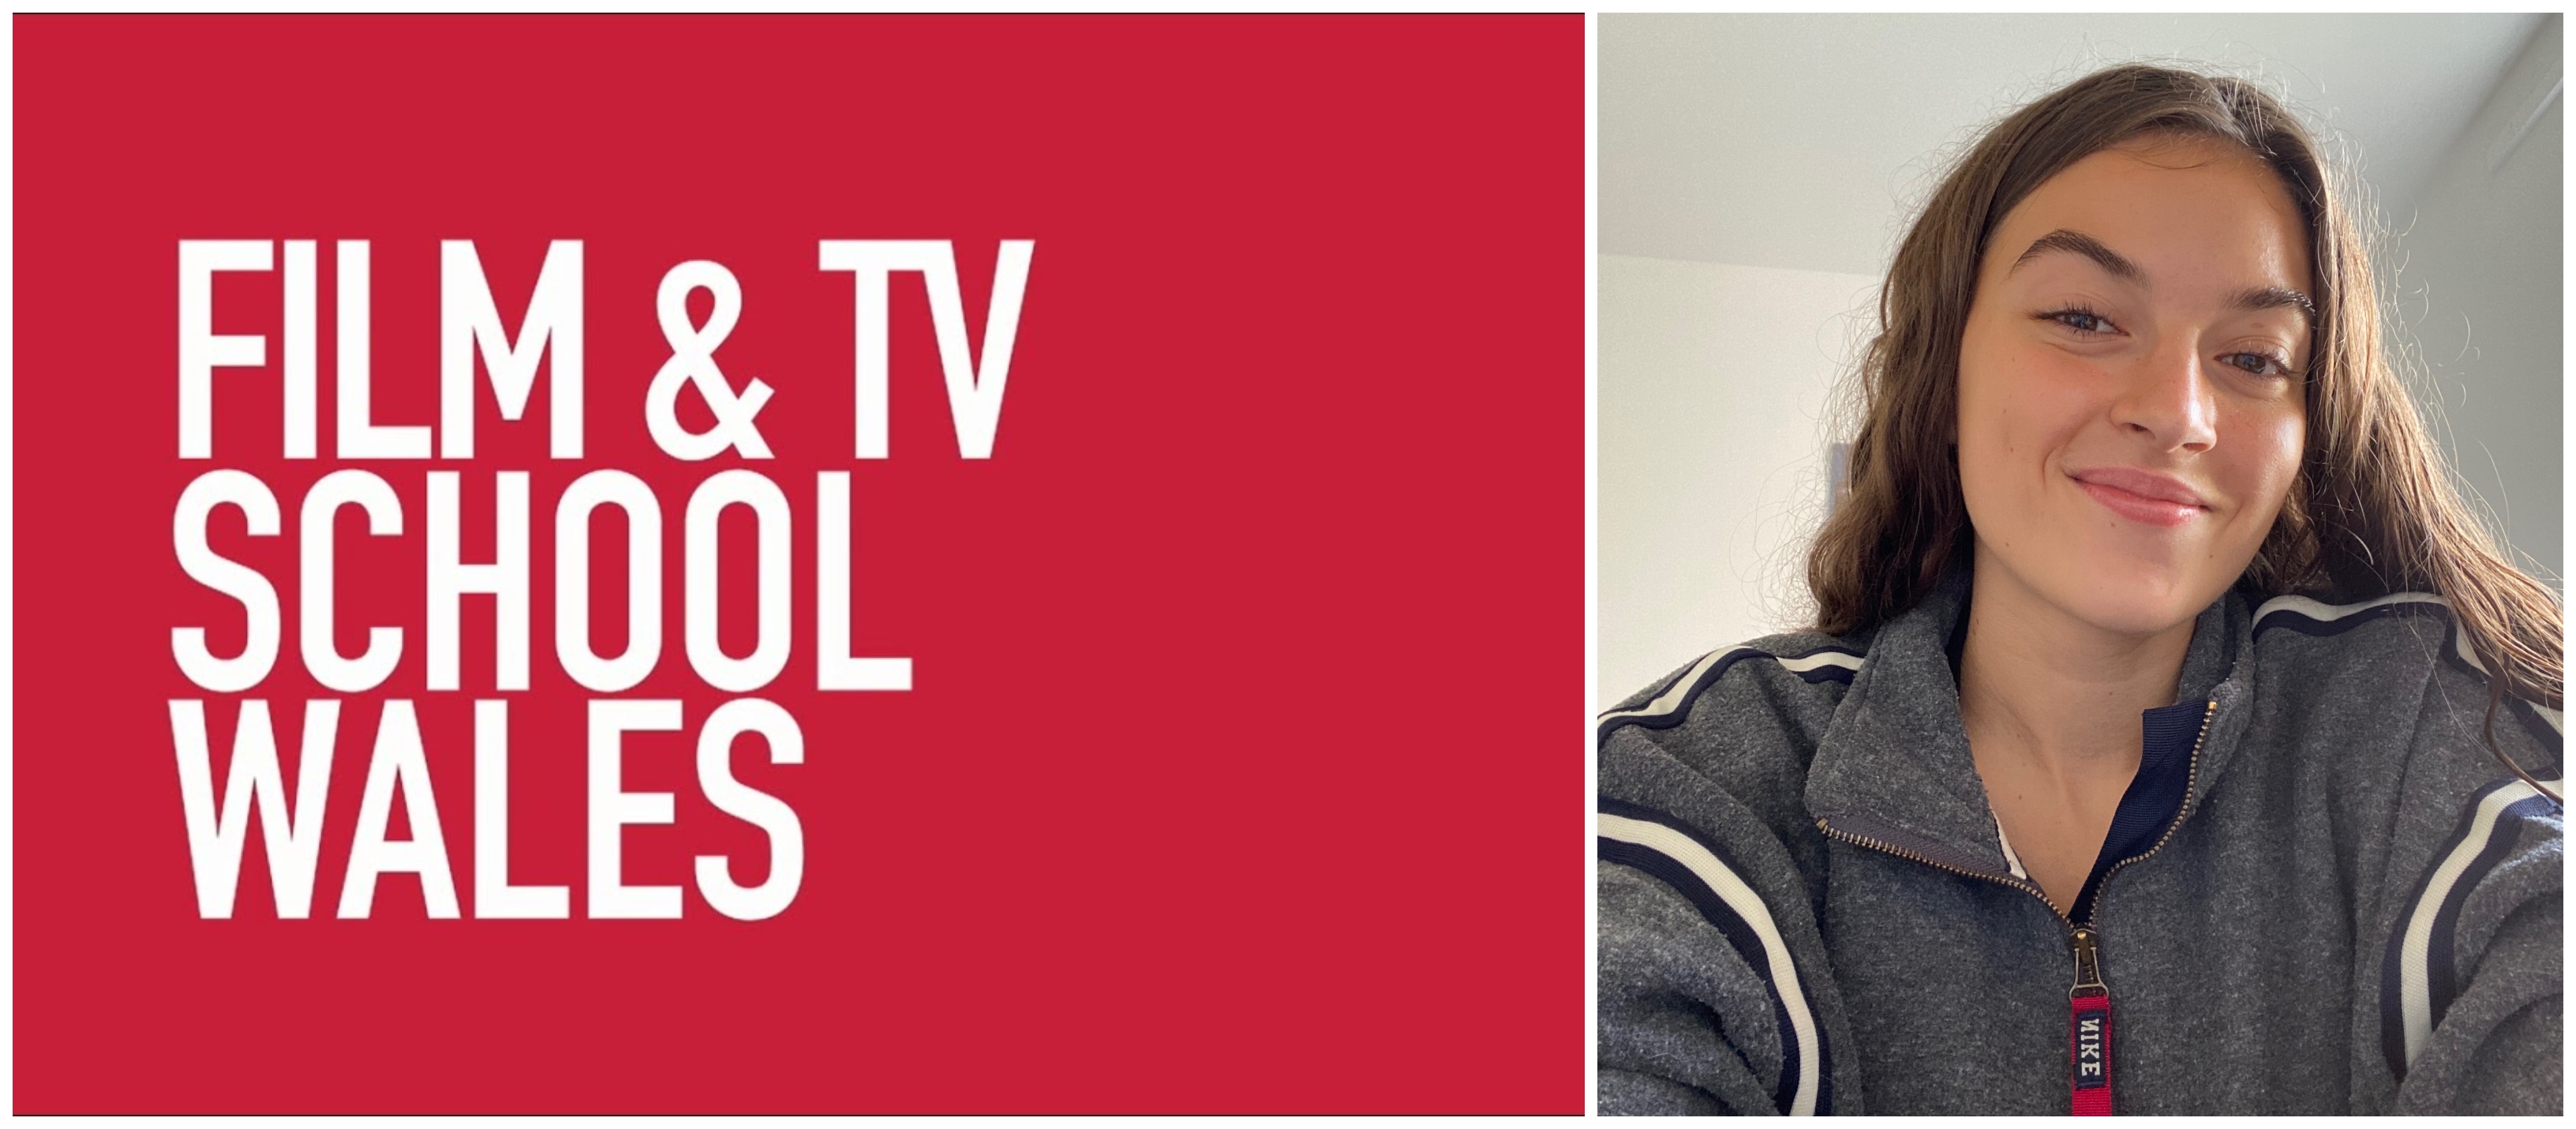 Collage of red logo that reads 'Film & TV School Wales' in white letters, and an image of a female student smiling with long brown hair.